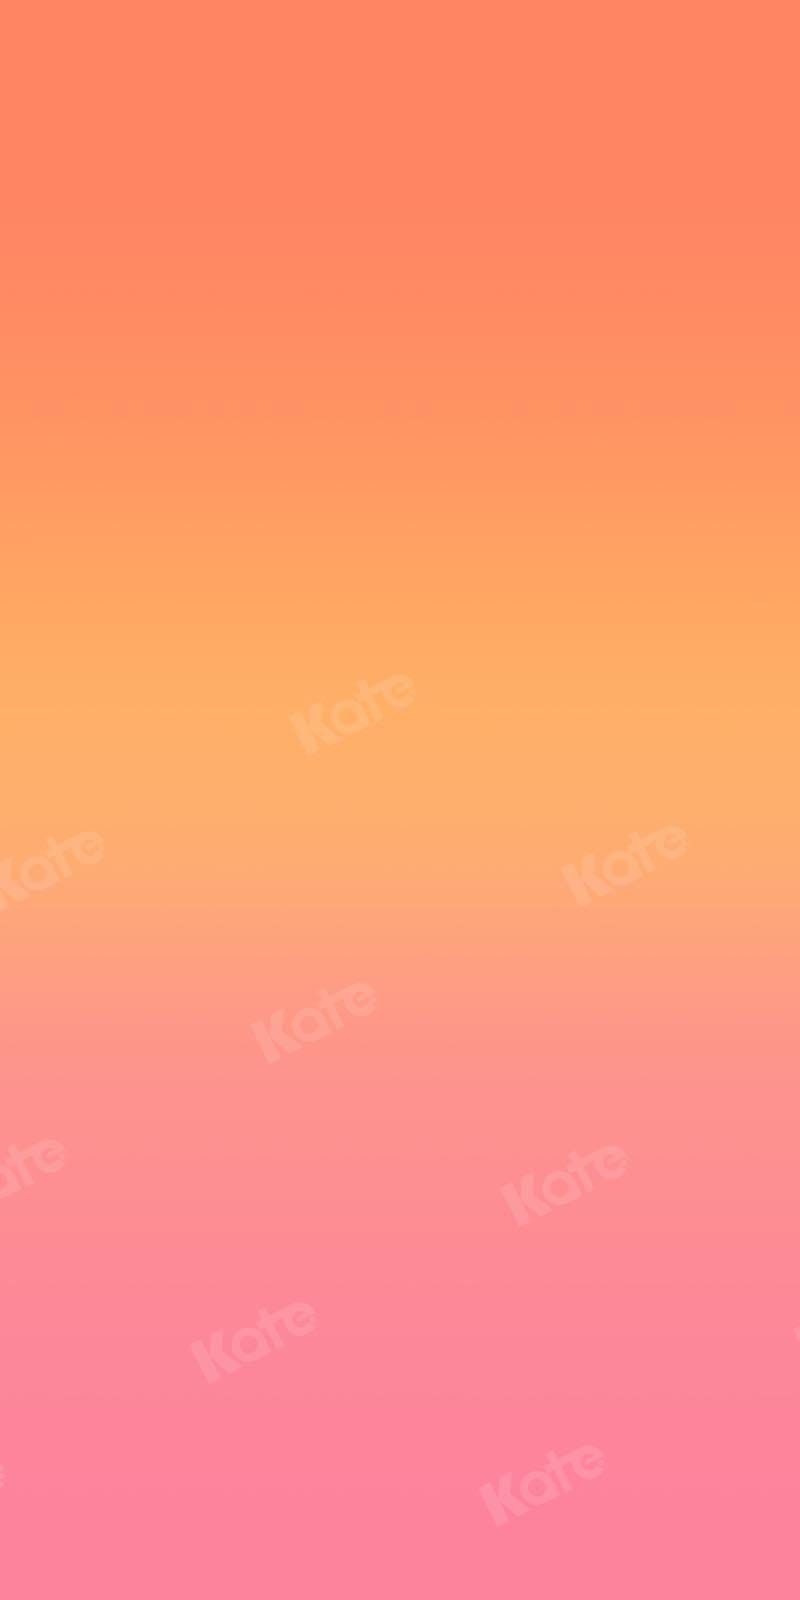 Kate Abstract Gradient Orange Backdrop Designed by Kate Image